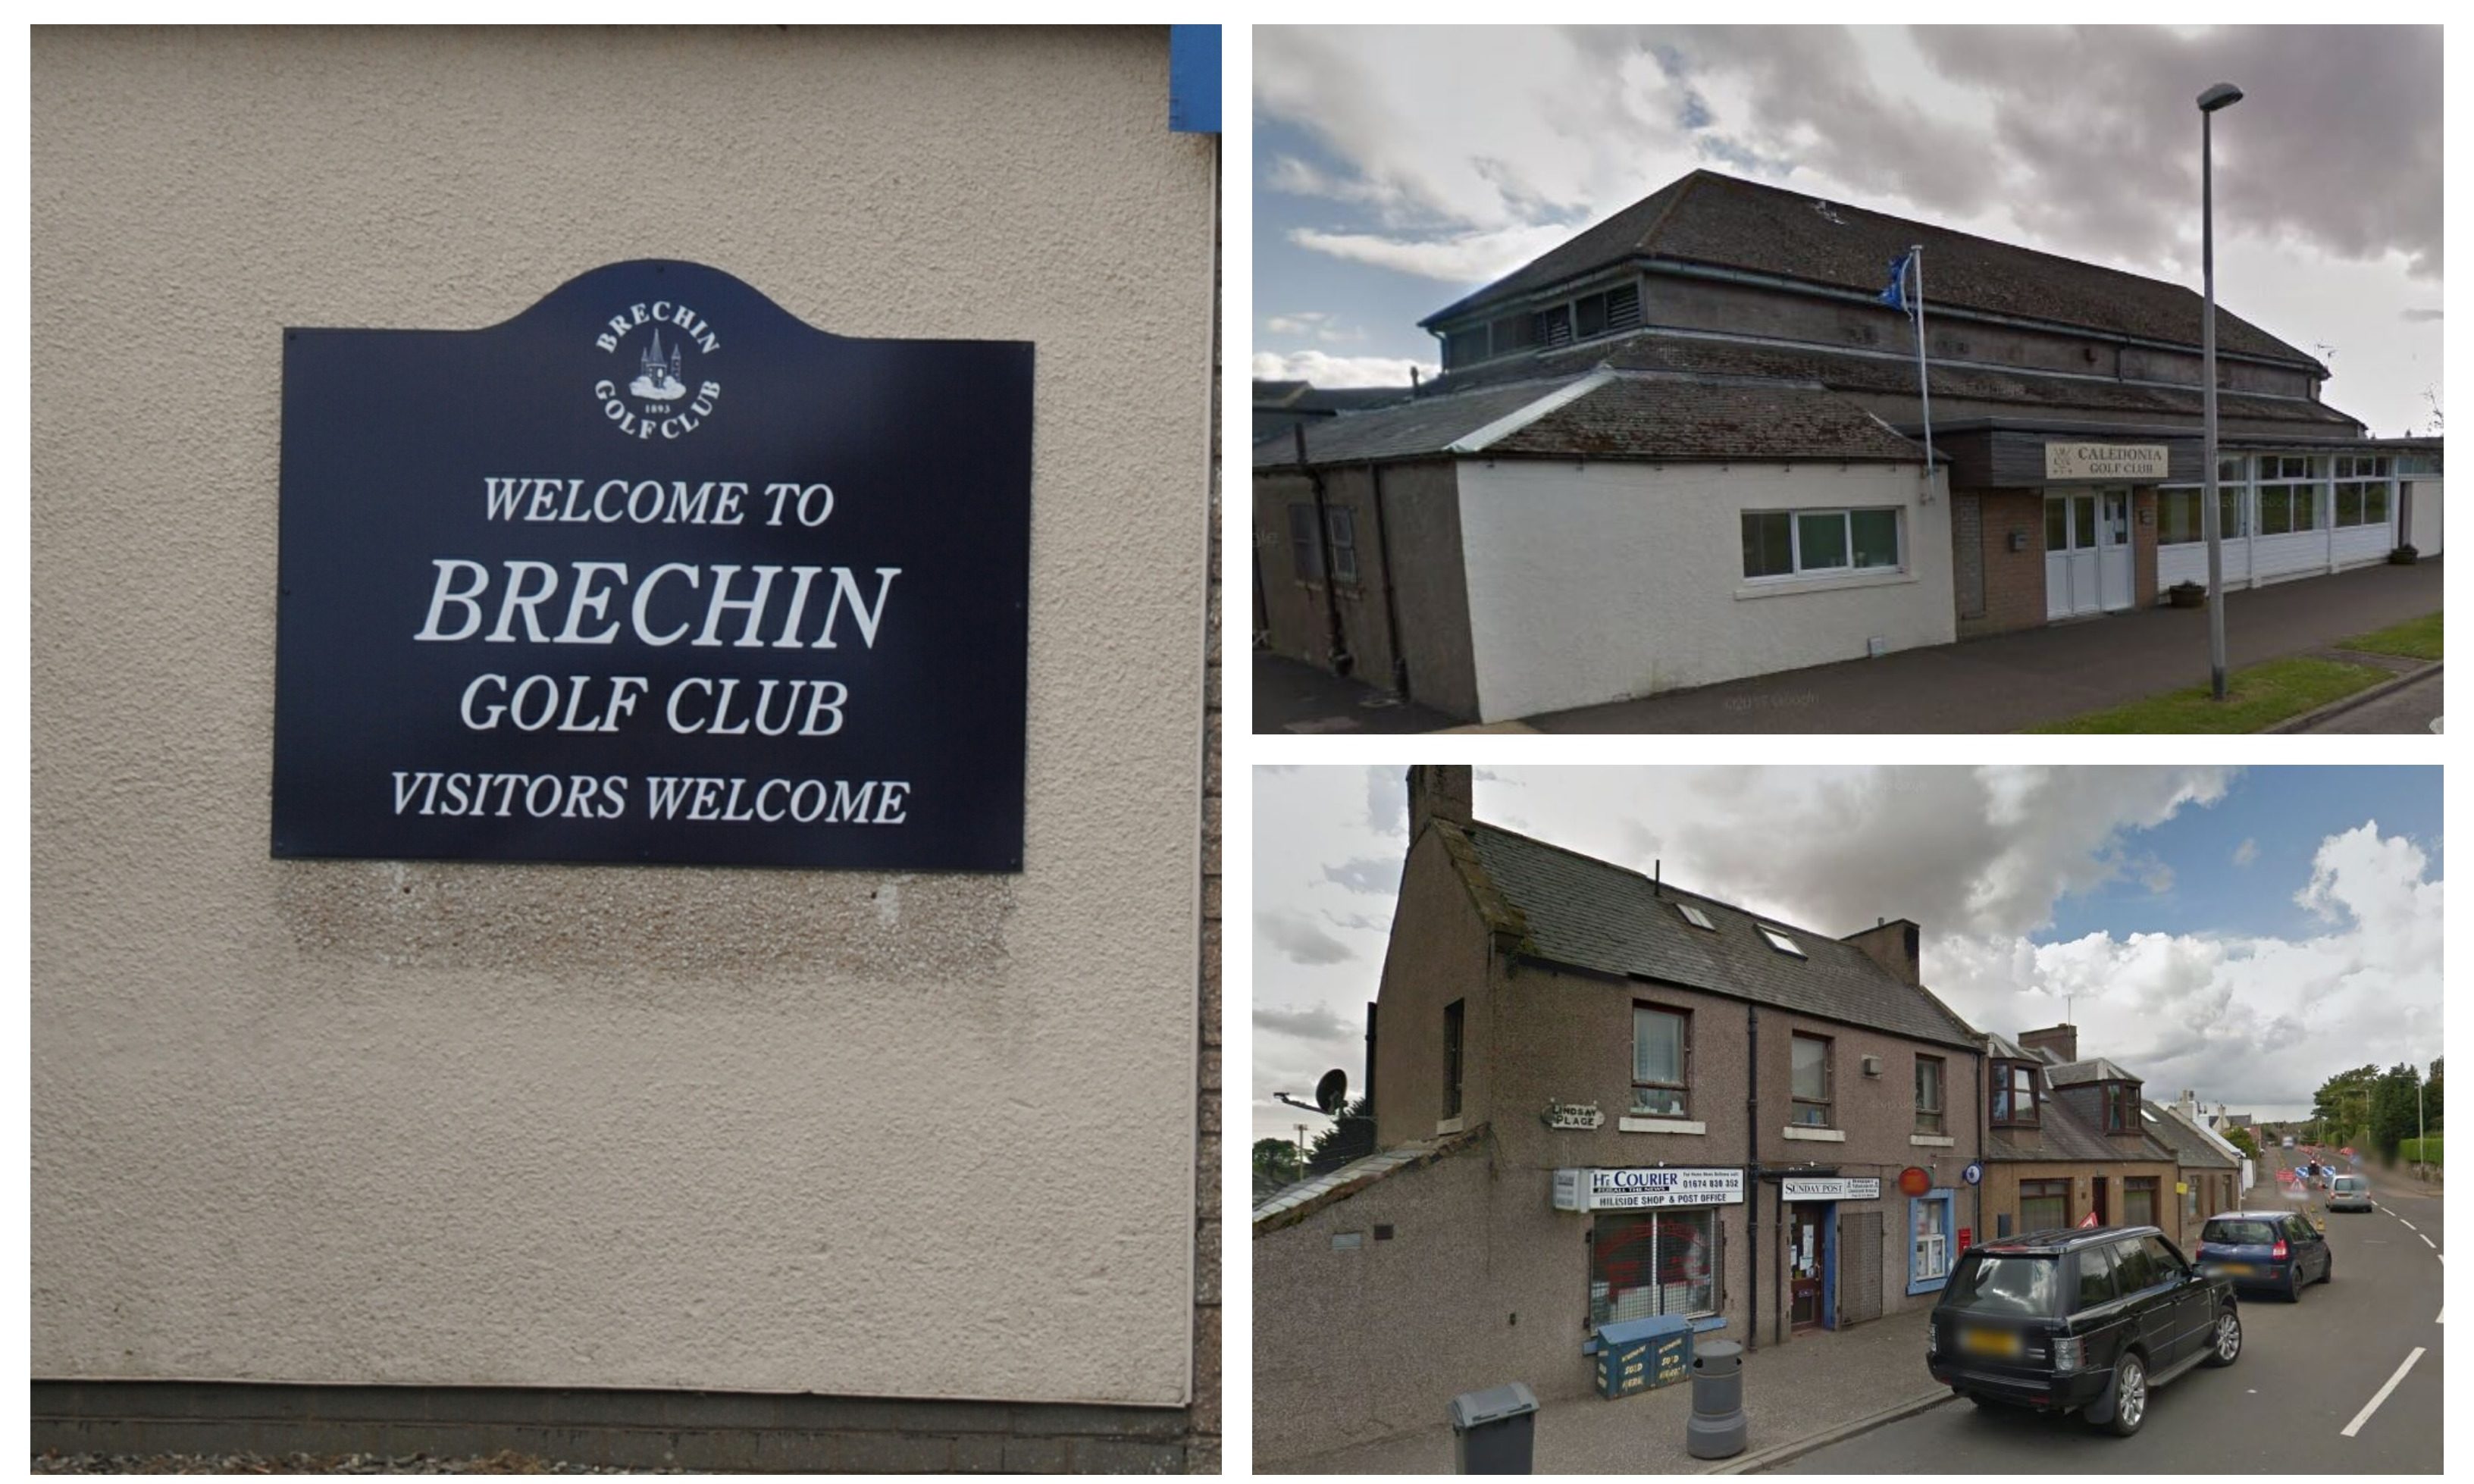 Brechin Golf Club. Caledonian Golf Club in Montrose and Hillside Post Office.